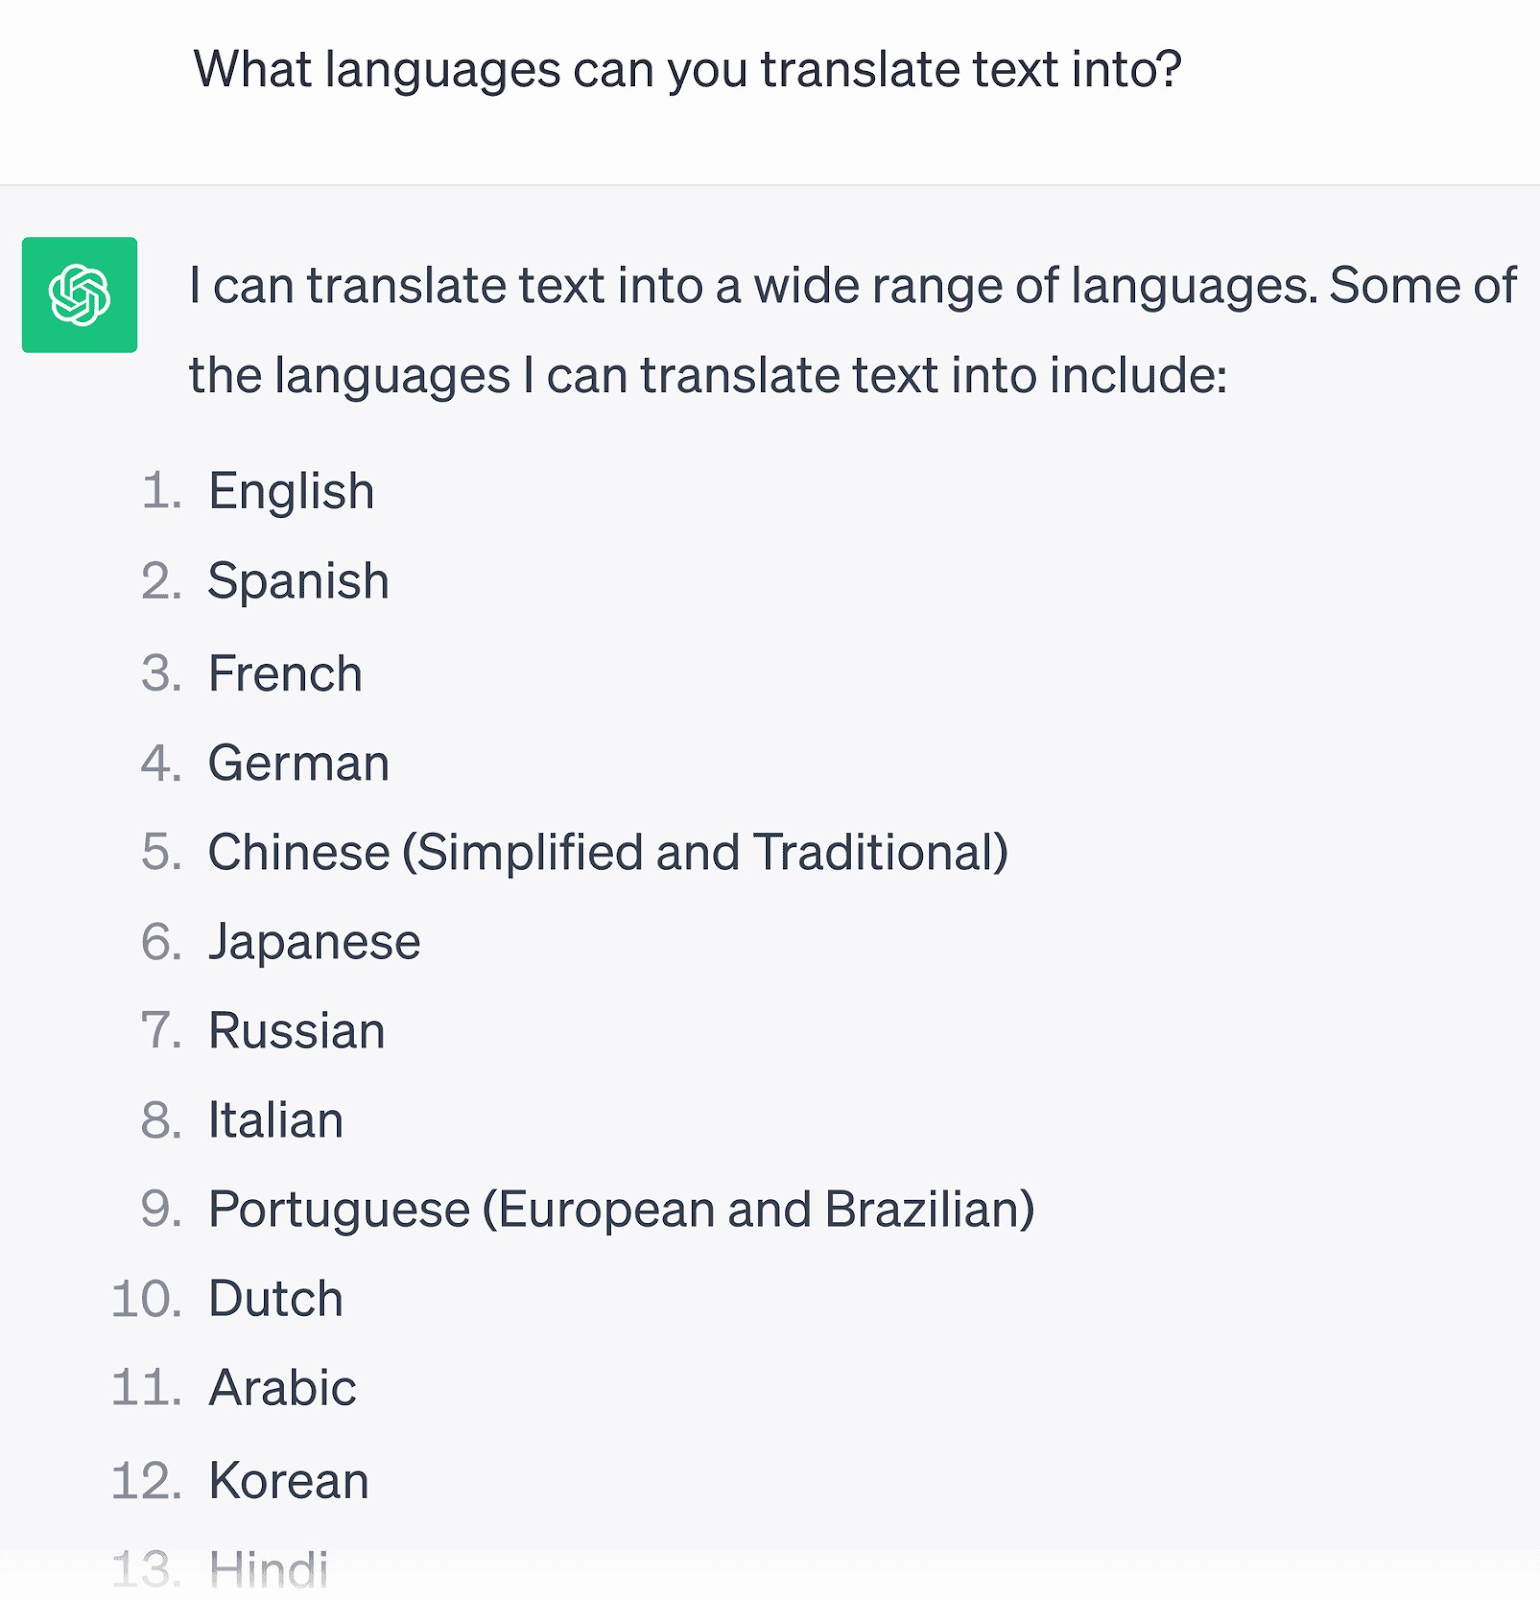 ChatGPT response to "What languages can you translate text into?" prompt